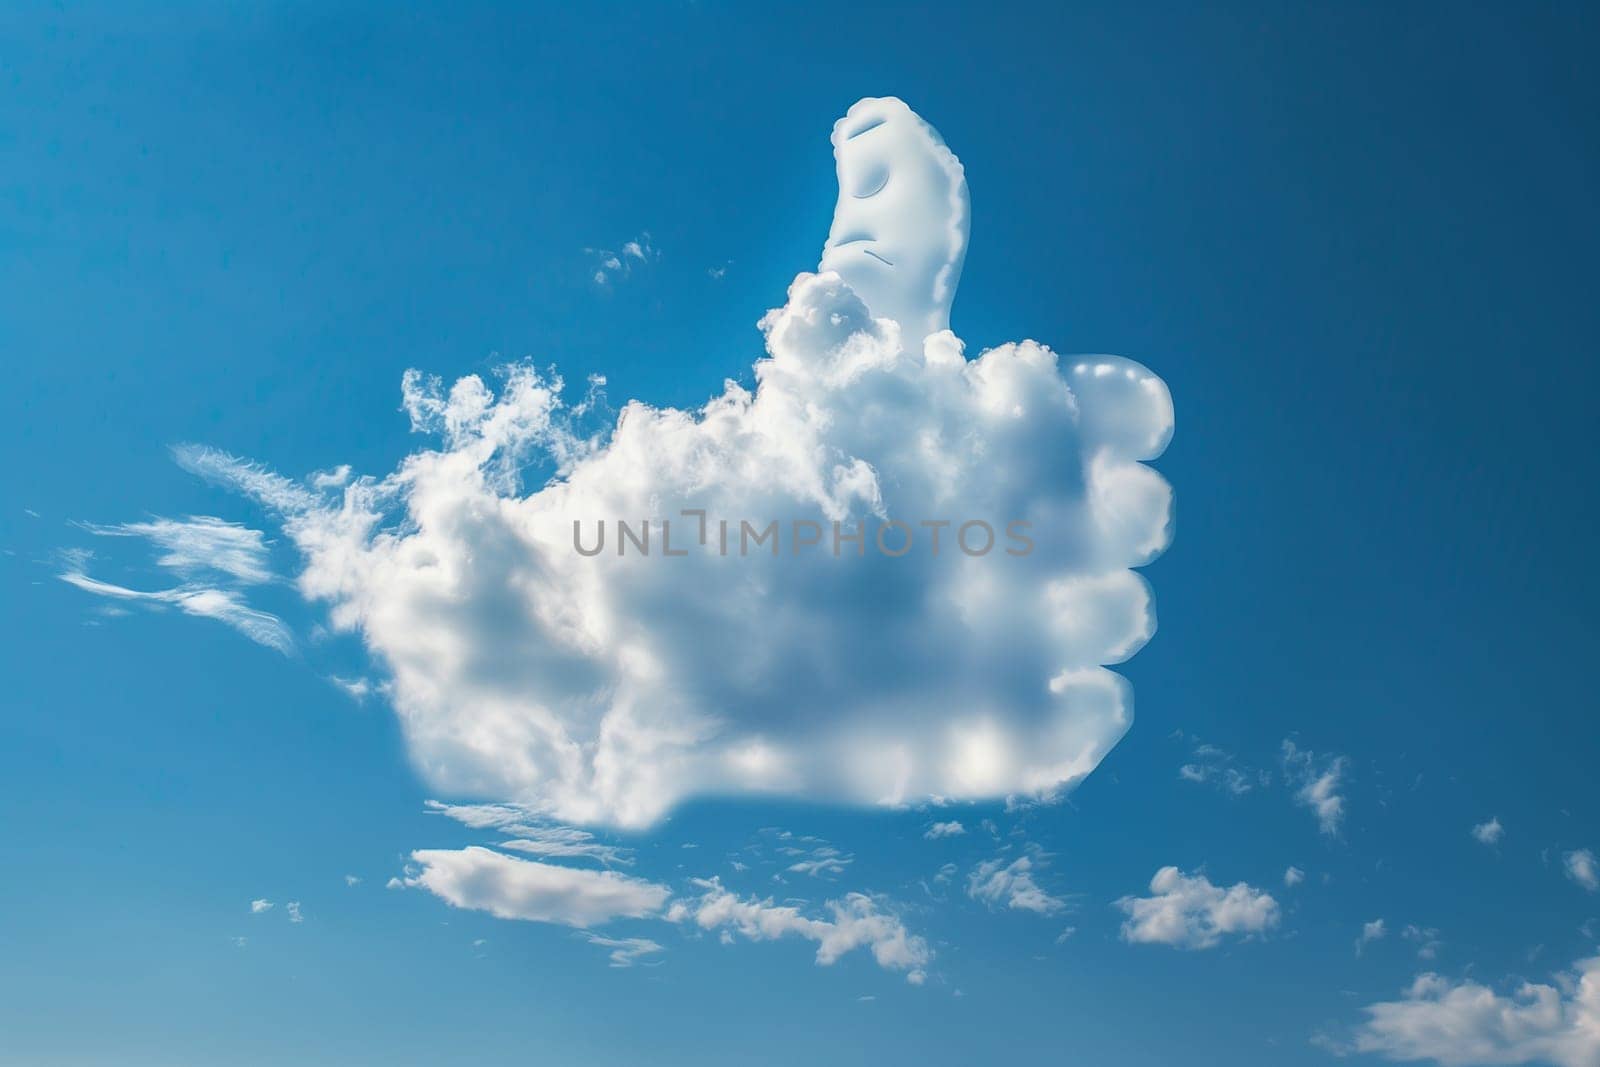 A cloud formation resembling a persons head, floating in the sky.